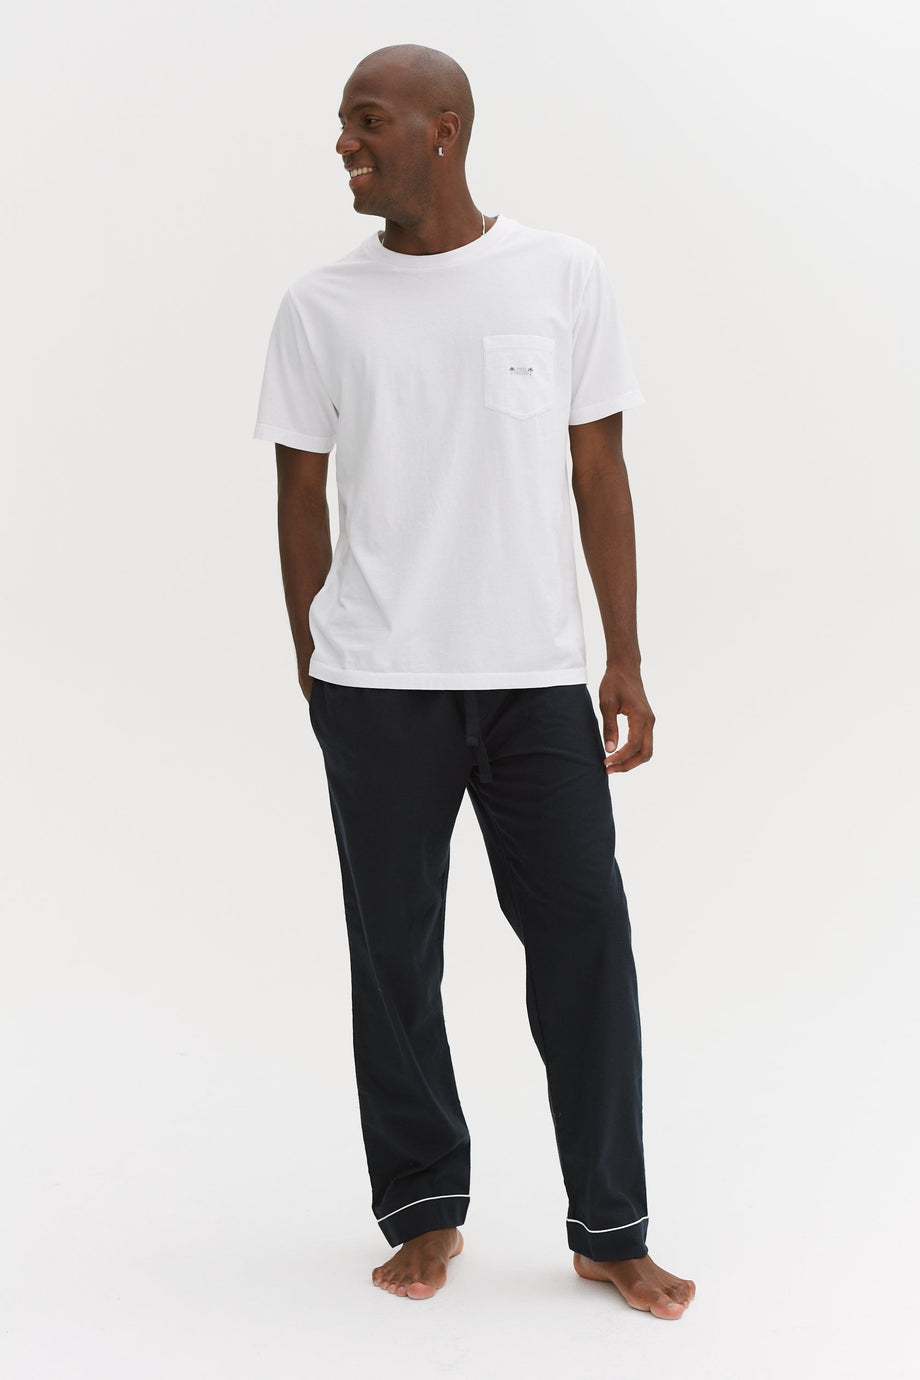 Men’s Tee and Trouser Set White/Brushed Cotton Navy